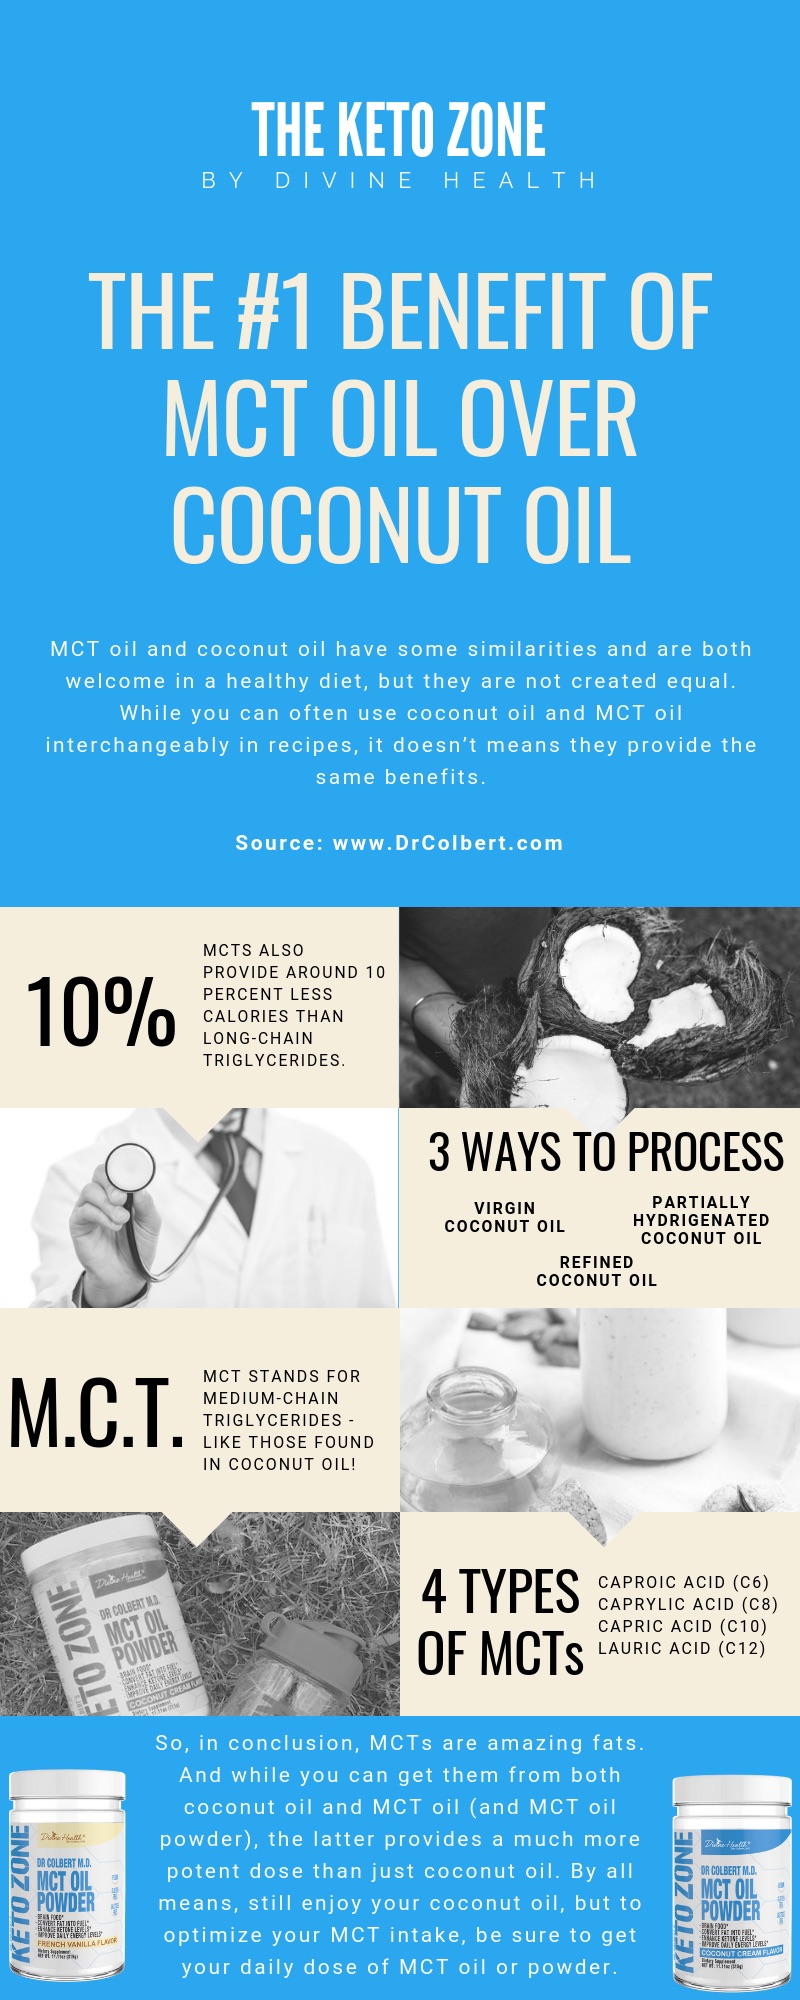 MCT Oil Powder, MCTs, MCT Oil, benefits of mct oil powder